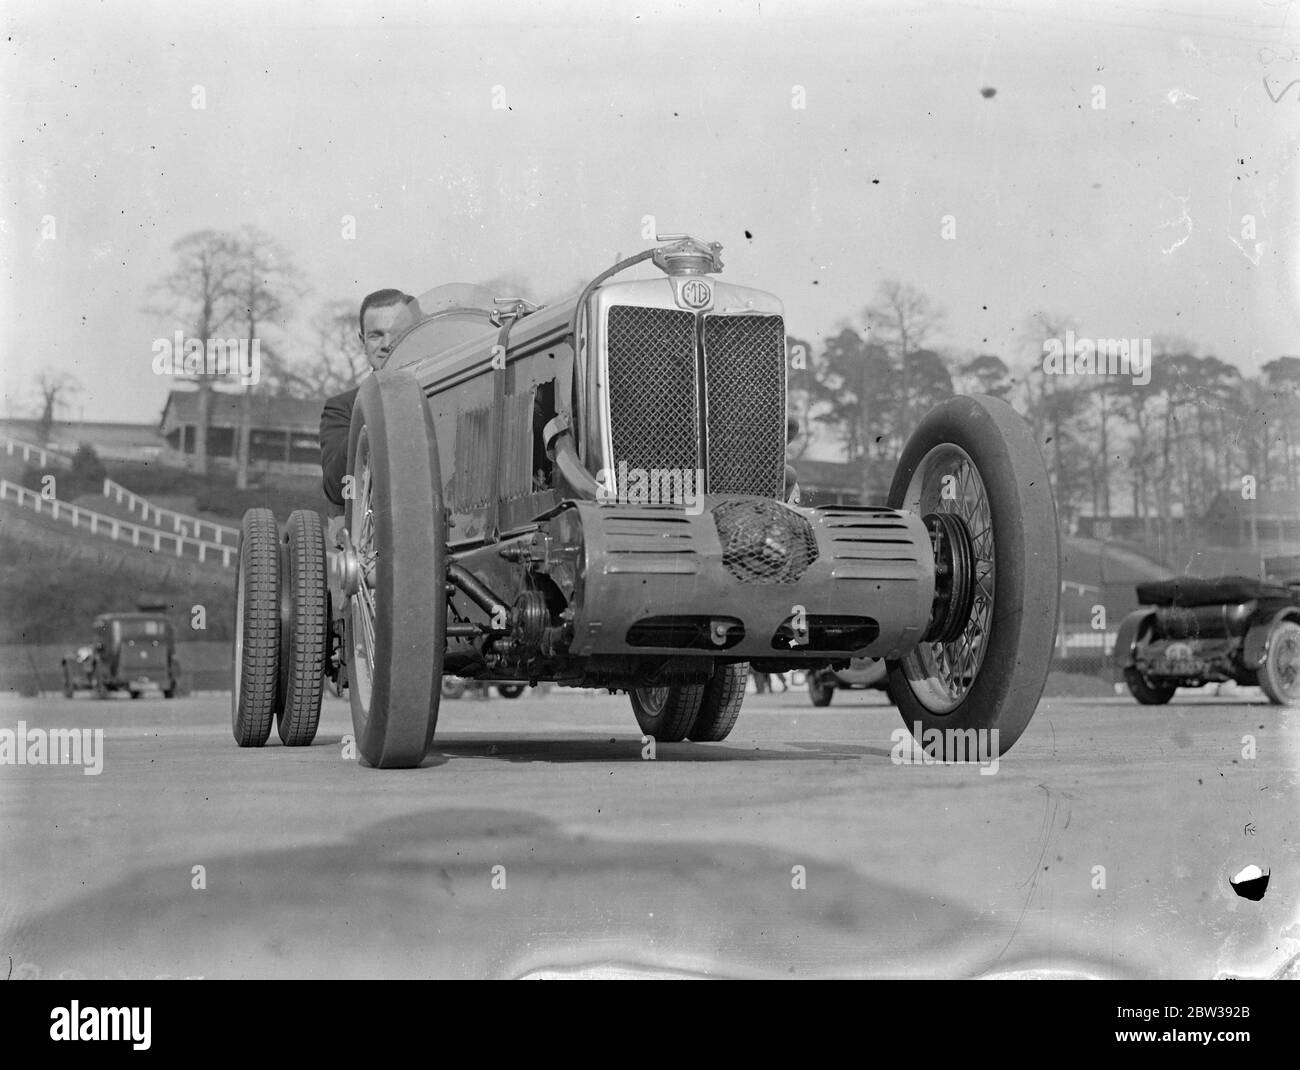 Car with double rear wheels for Brooklands mountain race . Mr D N Letts M G car was tried out at Brooklands in preparation for the Easter racing . It is equipped with double rear wheels specially for the Mountain race on Monday . Photo shows ; Mr D N Letts ' car with the double rear wheels out at Brooklands . 28 March 1934 30s, 30's, 1930s, 1930's, thirties, nineteen thirties Stock Photo